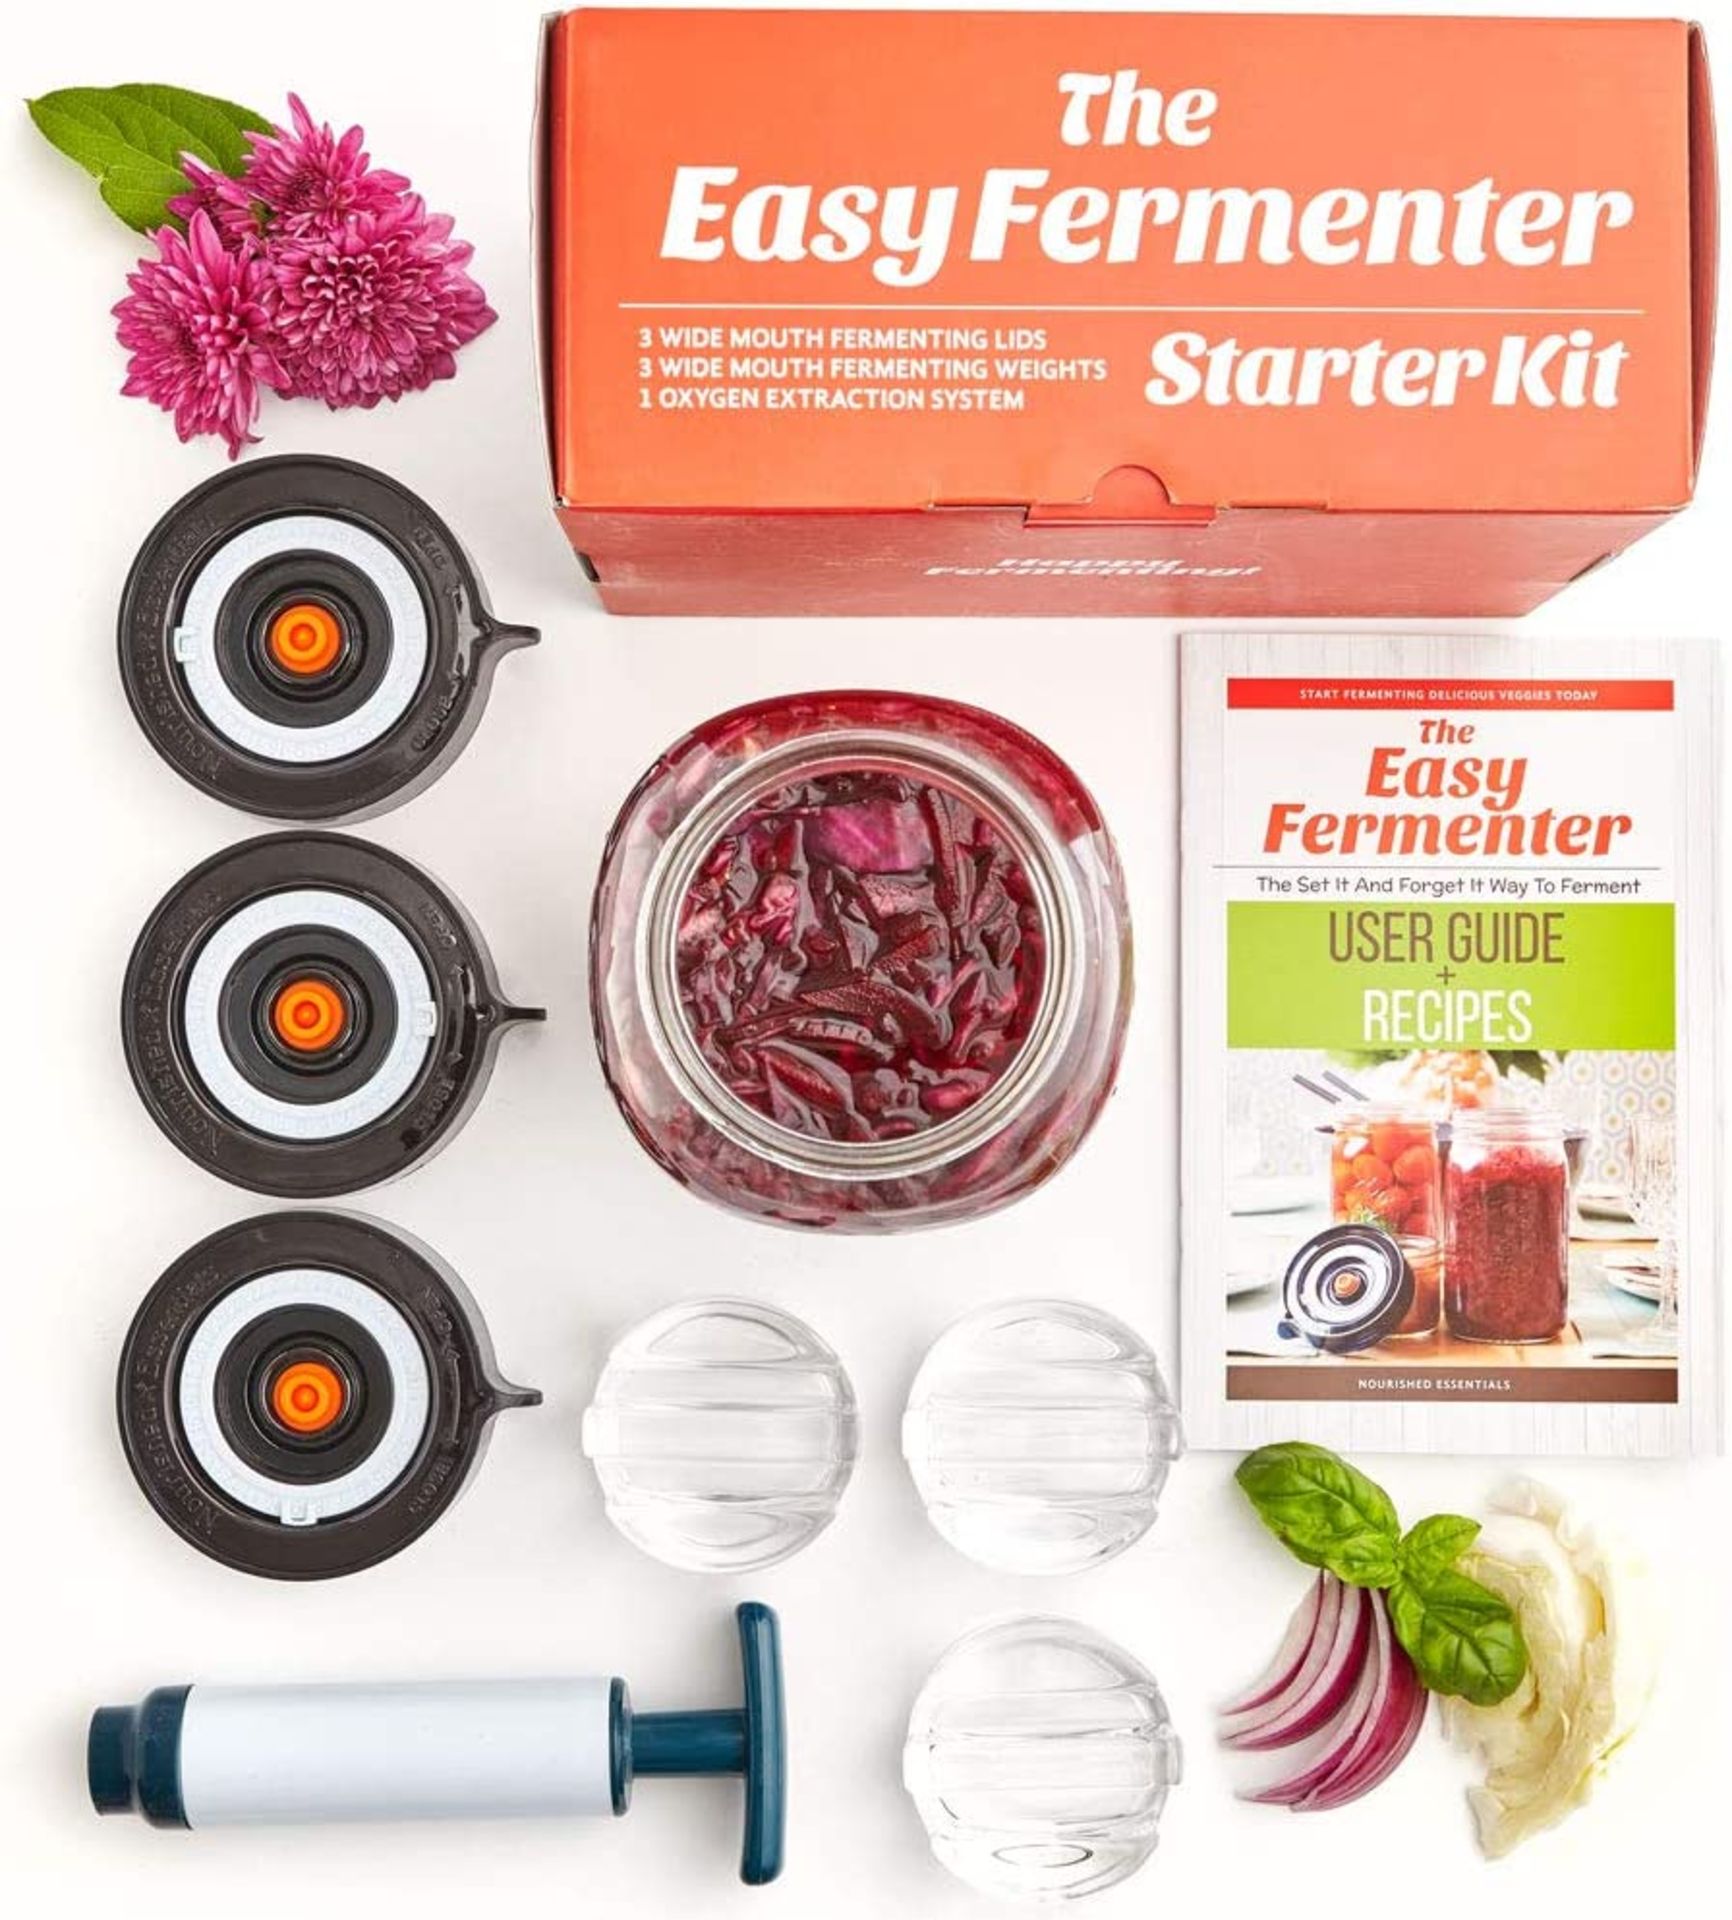 10 x Nourished Essentials Easy Fermenter Wide Mouth Fermentation Kit (3 Lids + 3 Weights + Pump) The